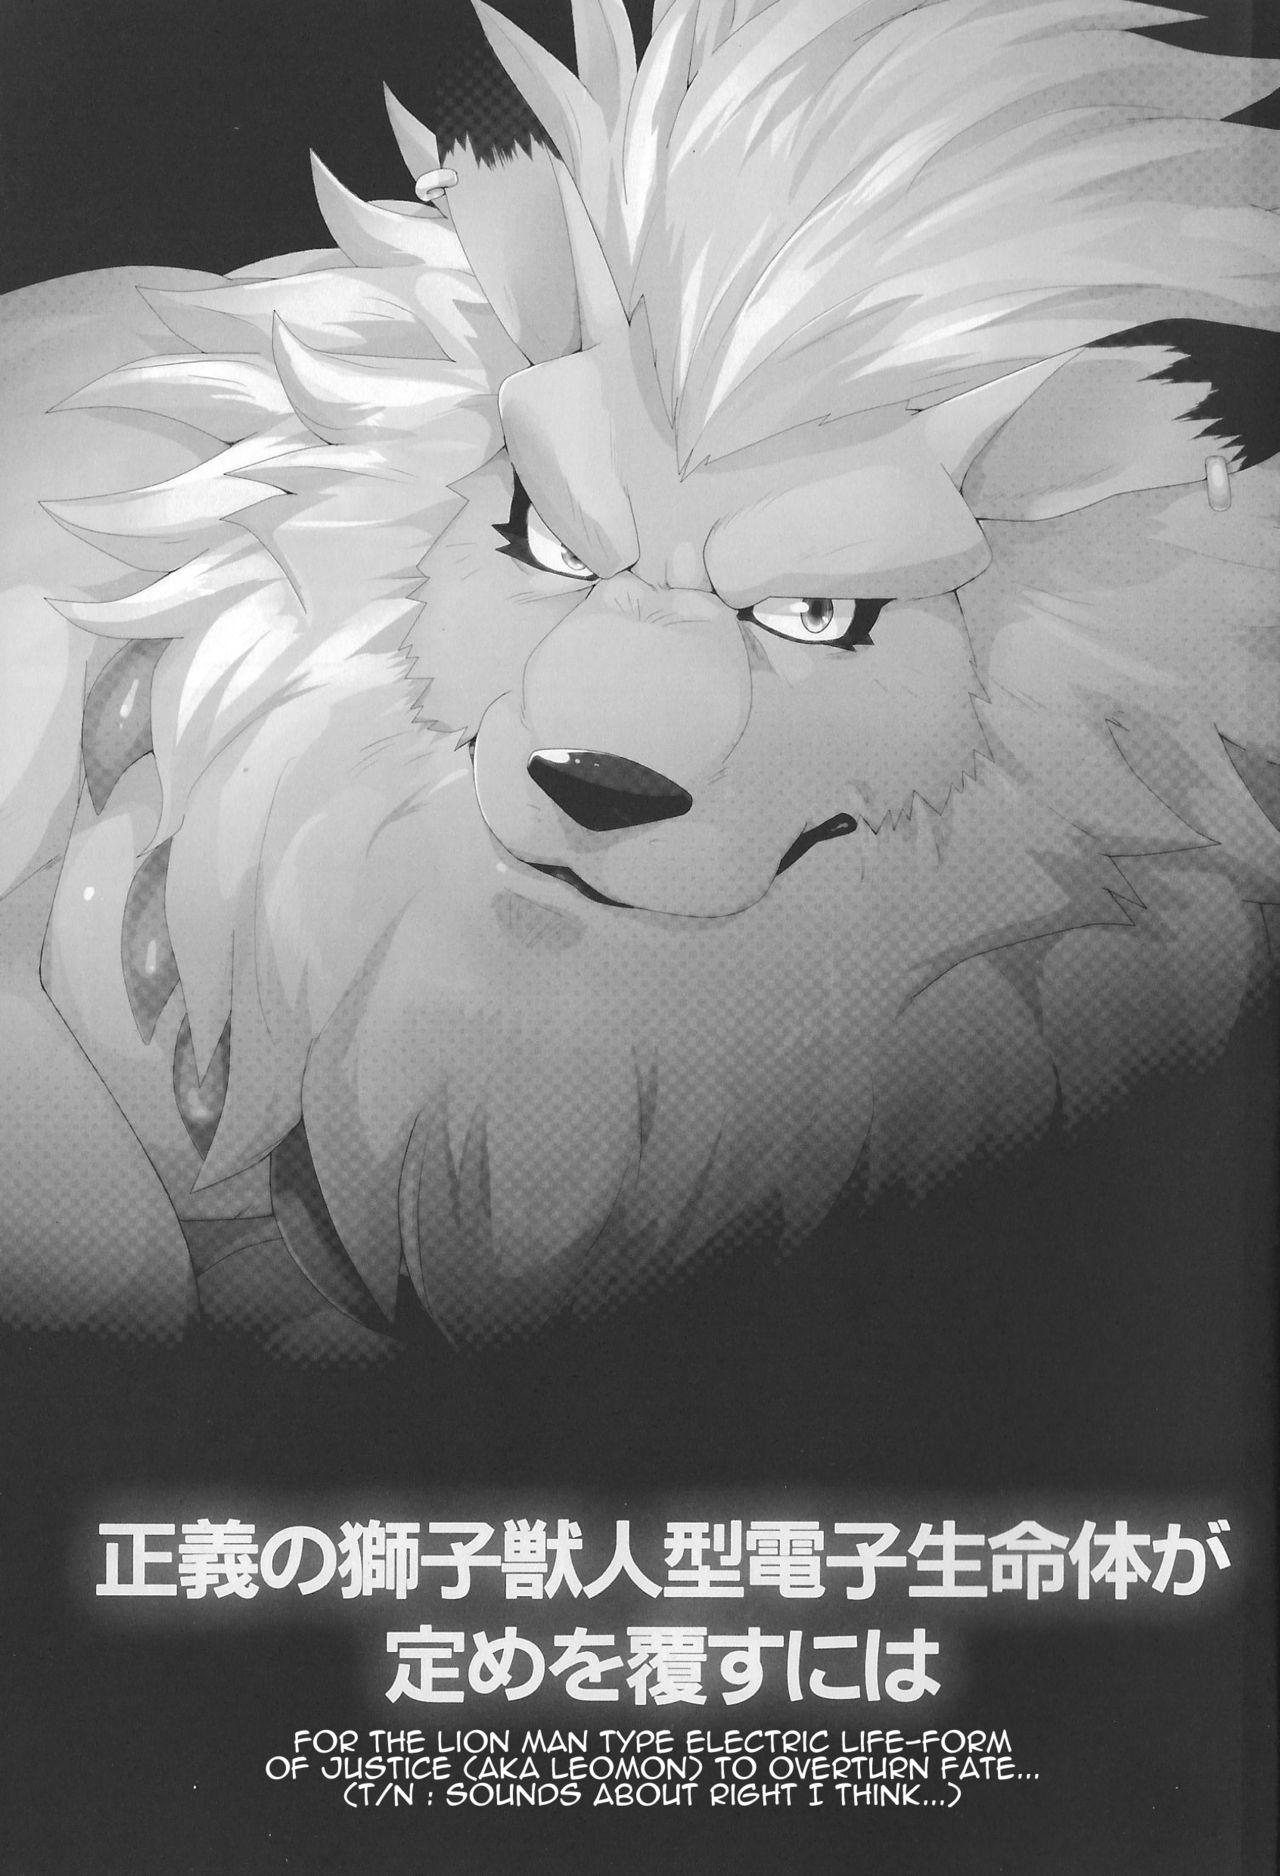 [Debirobu] For the Lion-Man Type Electric Life Form to Overturn Fate - Leomon Doujin [ENG] 3